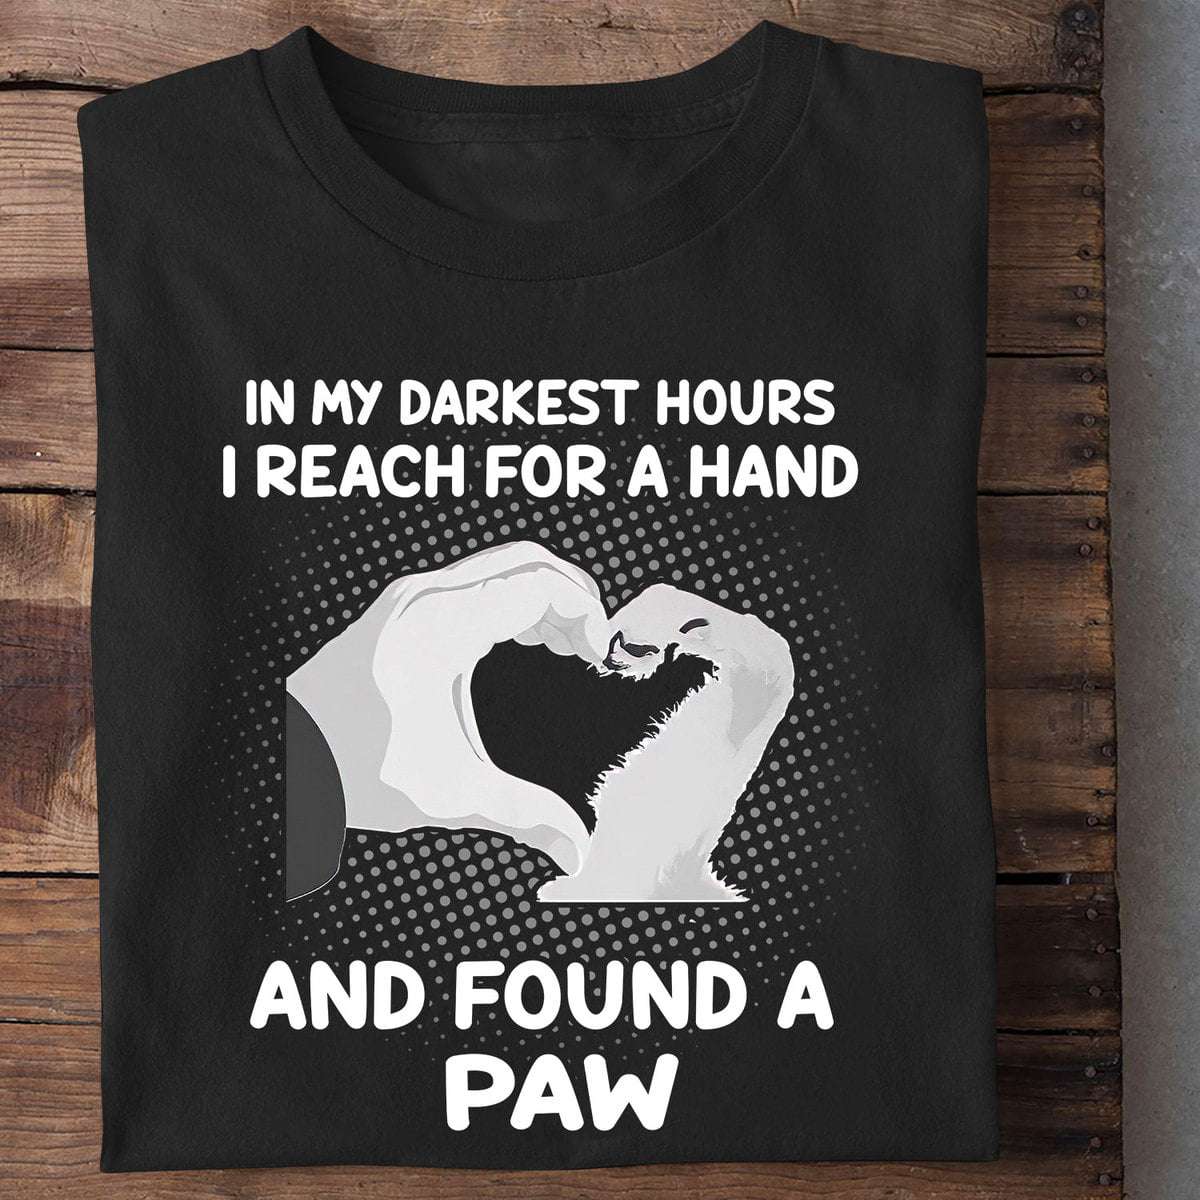 In my darkest hours I reach for a hand and found a paw - People and dog, owner dog heart